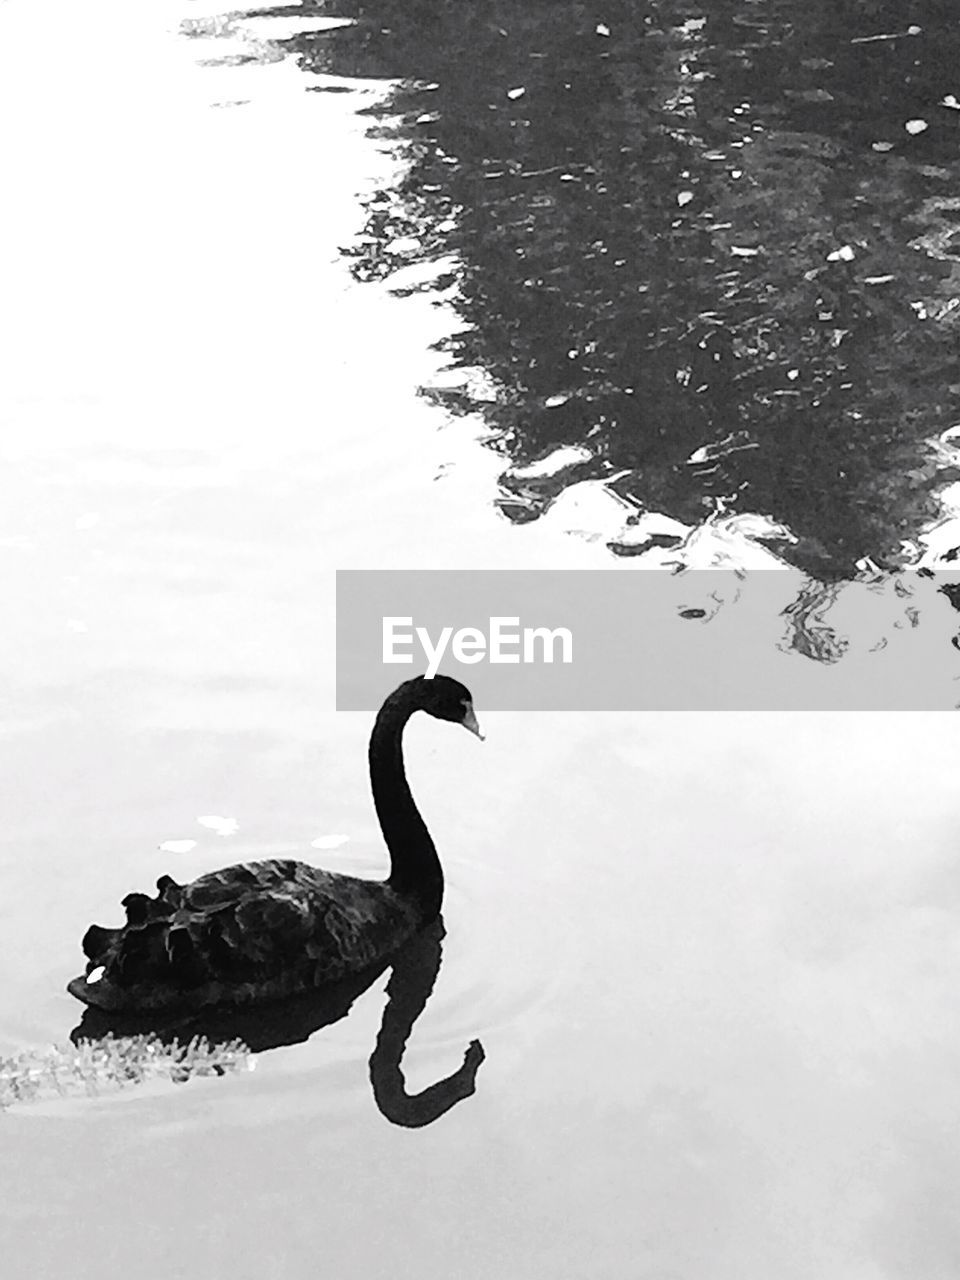 High angle view of black swan swimming in lake